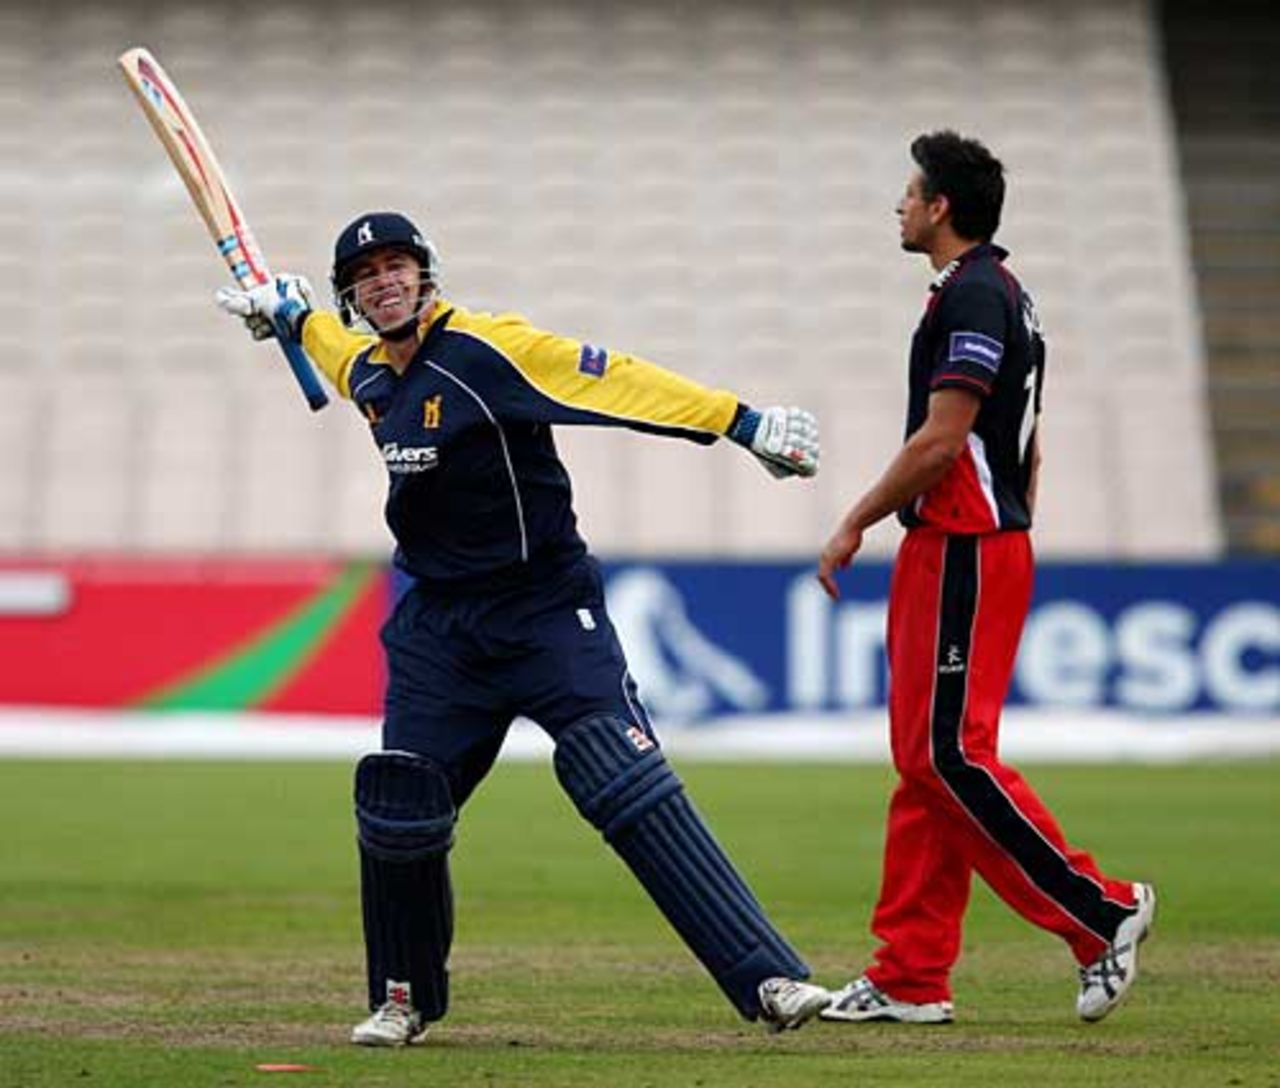 Rikki Clarke hit the winning run as Warwickshire clinched the Division Two title, Lancashire v Warwickshire, Pro40, Old Trafford, September 27, 2009